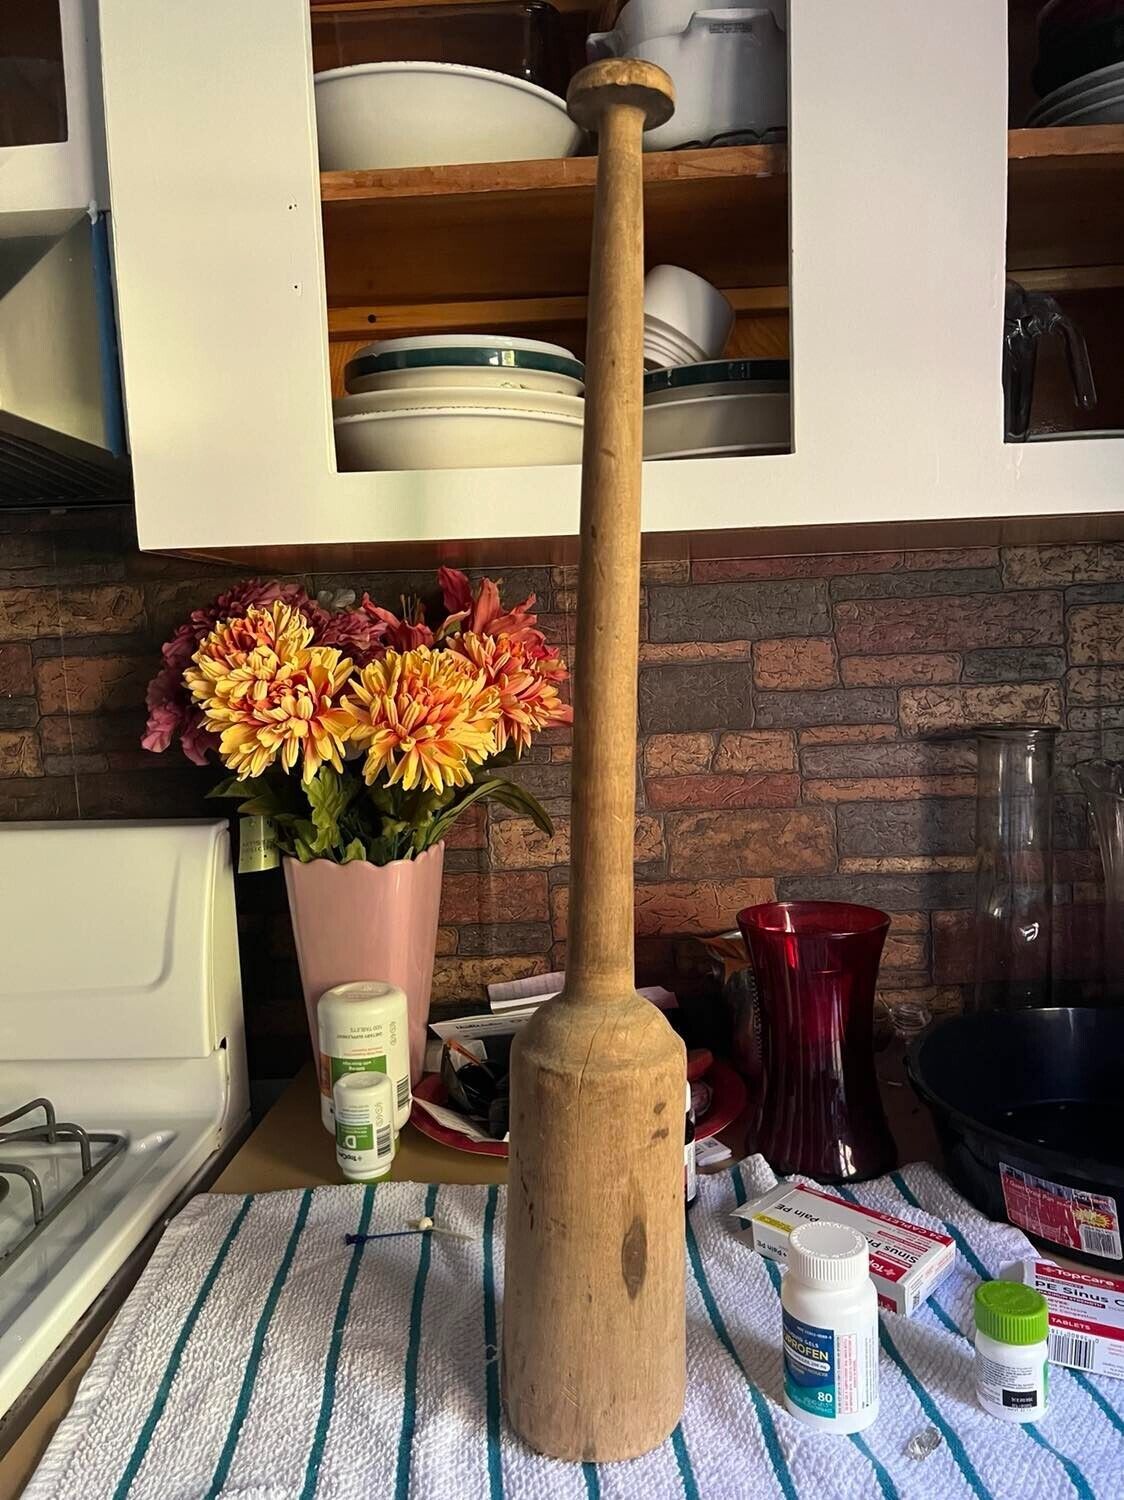 Masher Cabbage or Butter Churn Antique.